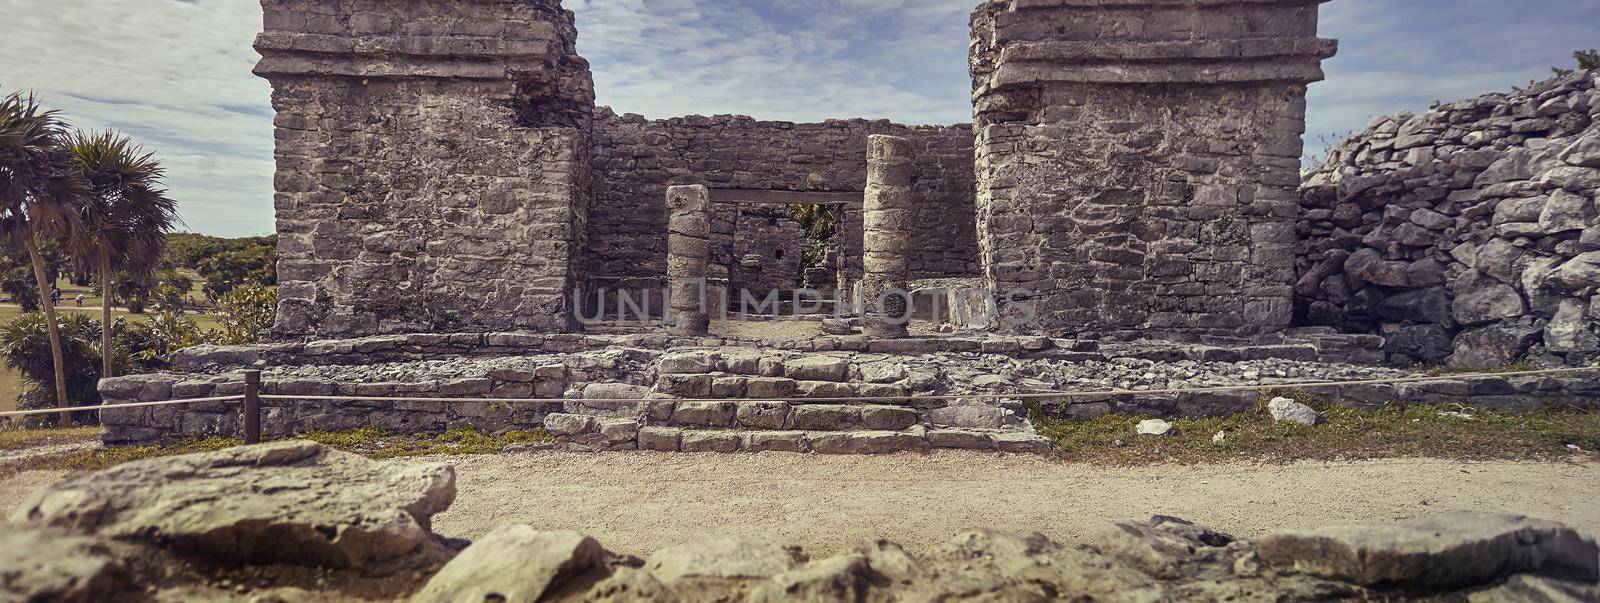 Tulum ruins banner image by pippocarlot